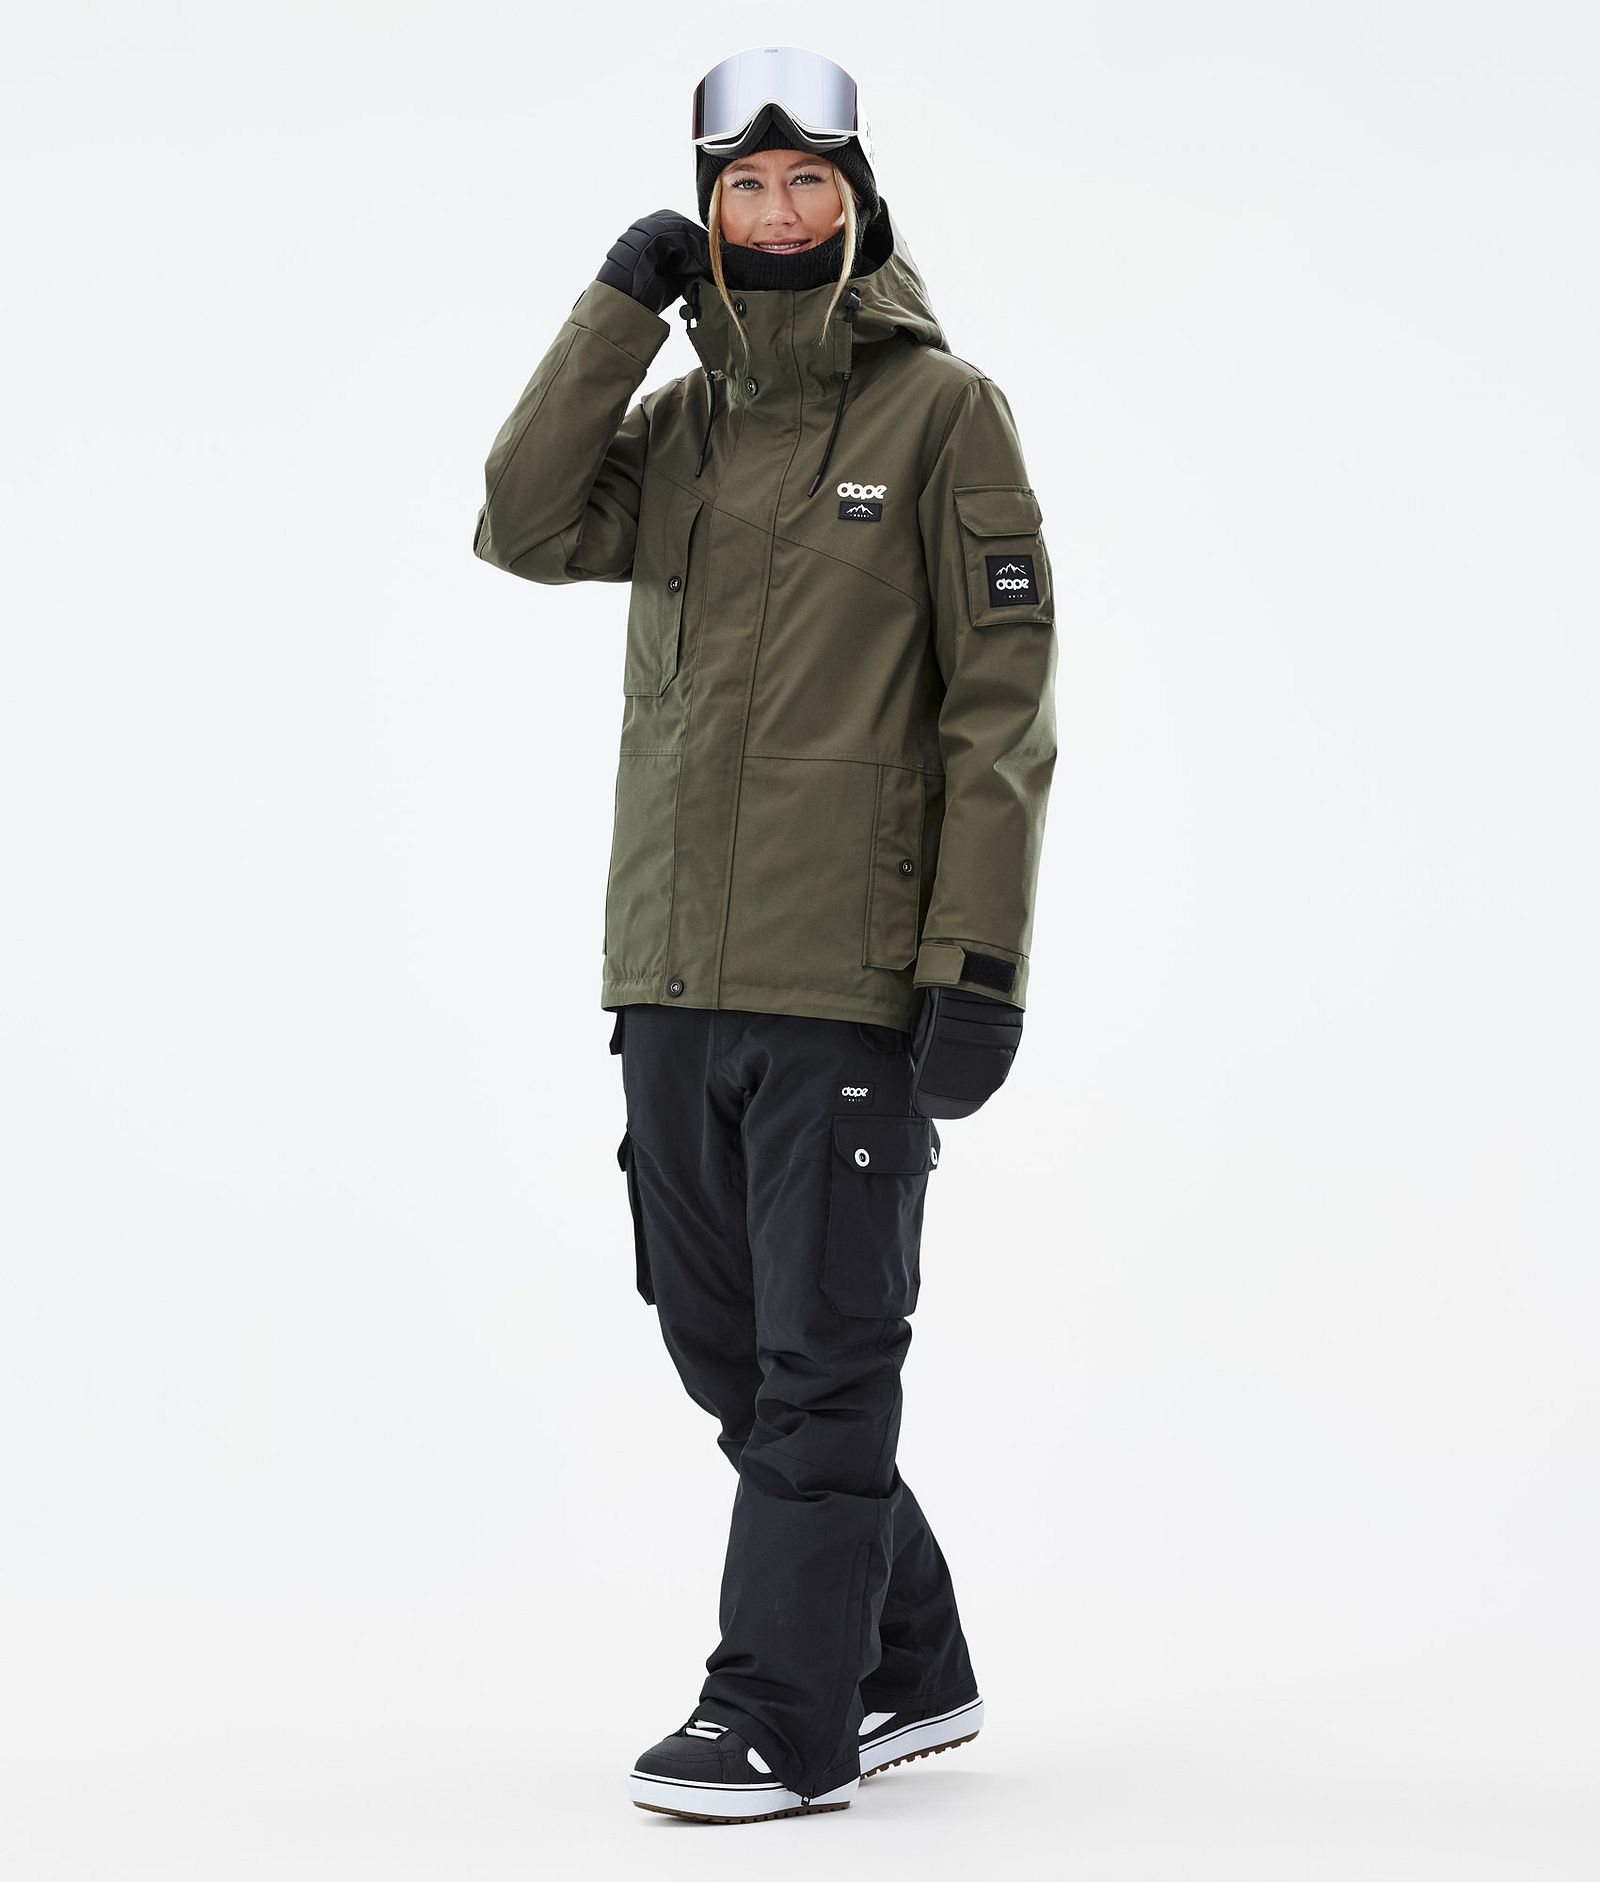 Adept W Outfit de Snowboard Mujer Olive Green/Black